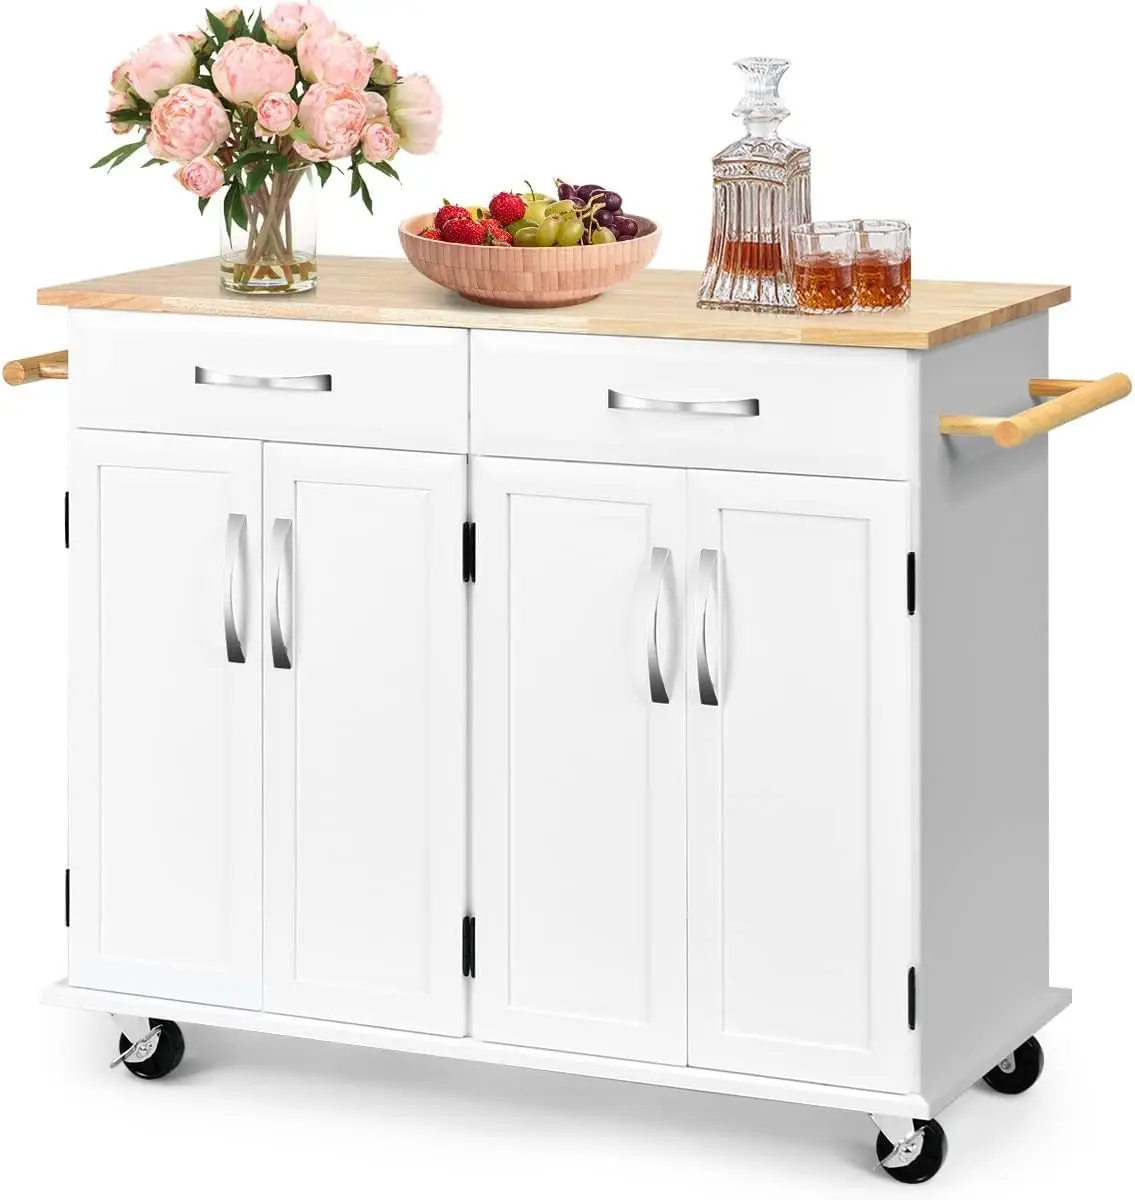 

Kitchen Island Cart, Mobile Serving Trolley Cart with Rubber Wood Top, 2 Drawers, 2 Cabinets, 2 Towel Racks,Utility Storage Cart